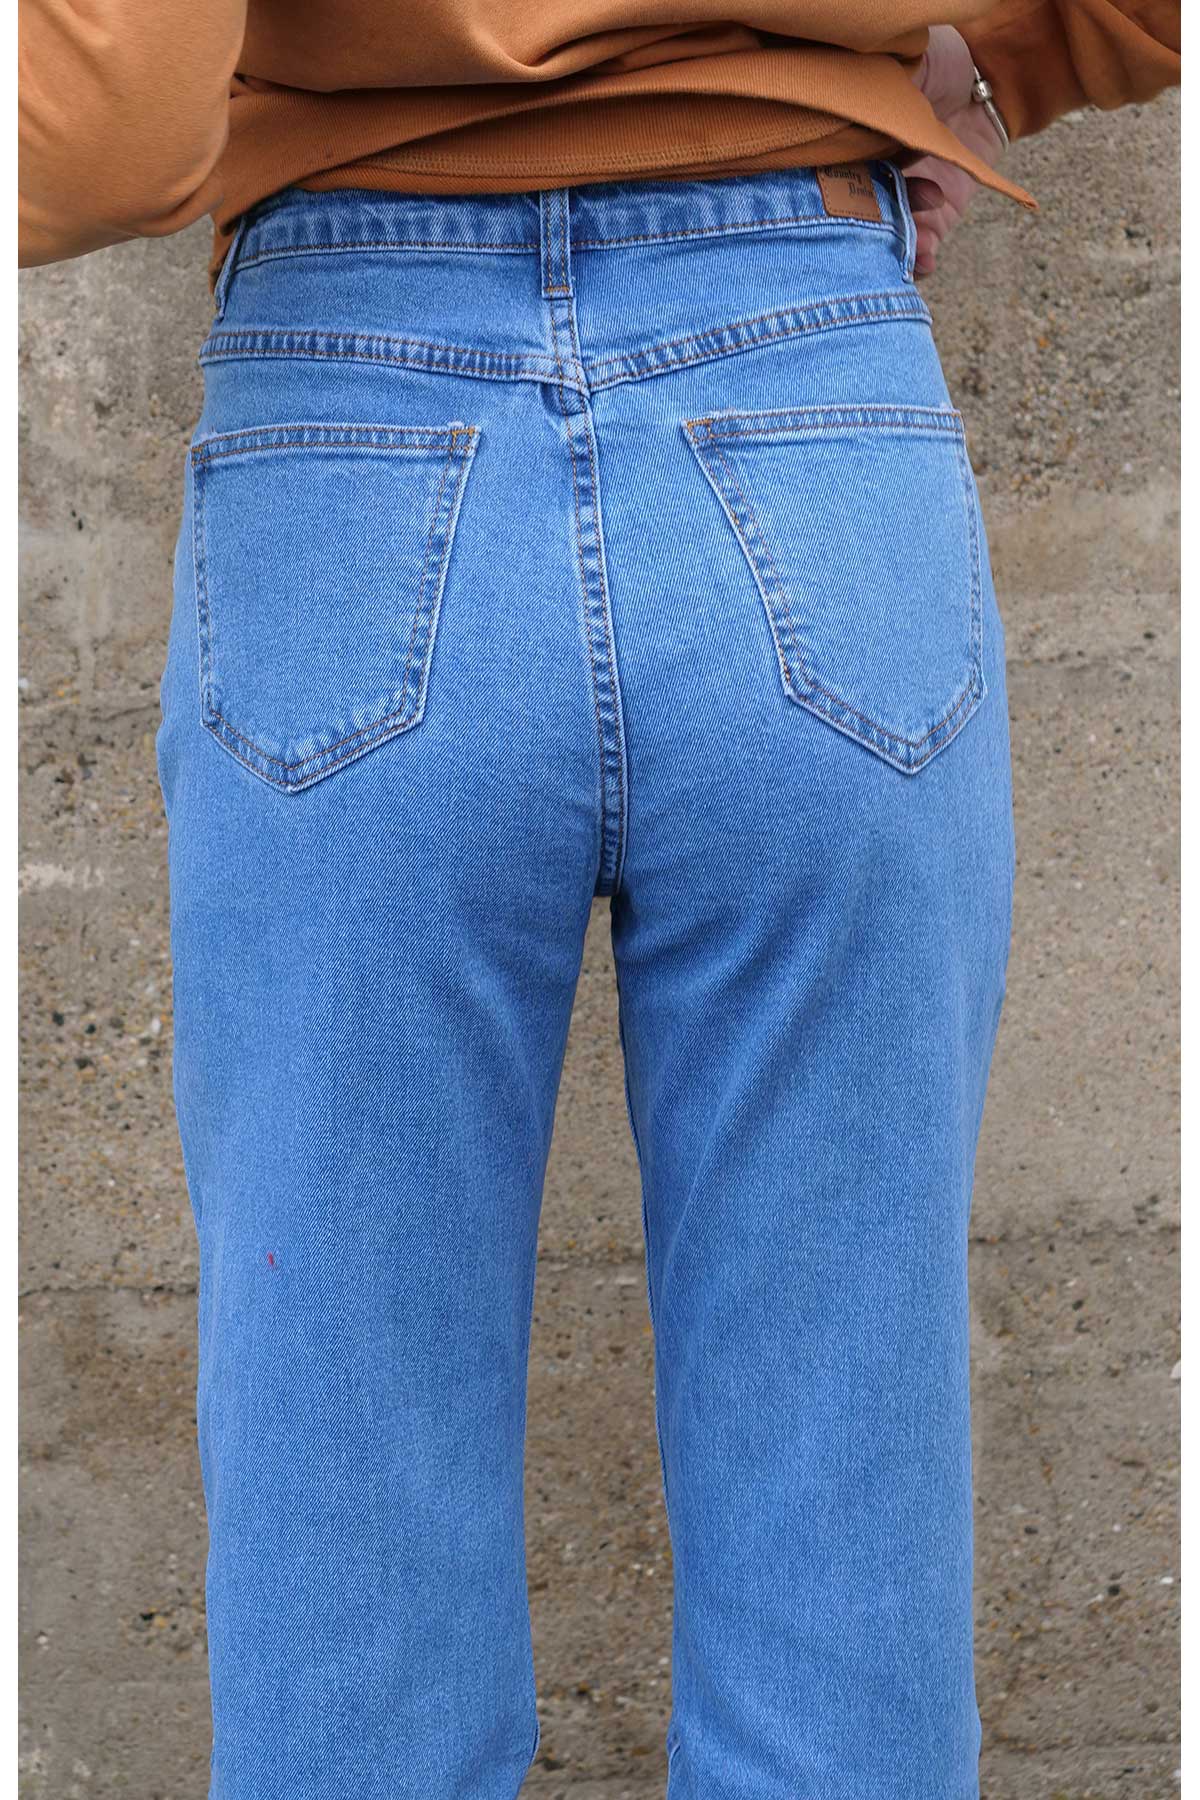 Raw hem Stretch Mum Jean by Country denim with back pockets and label.